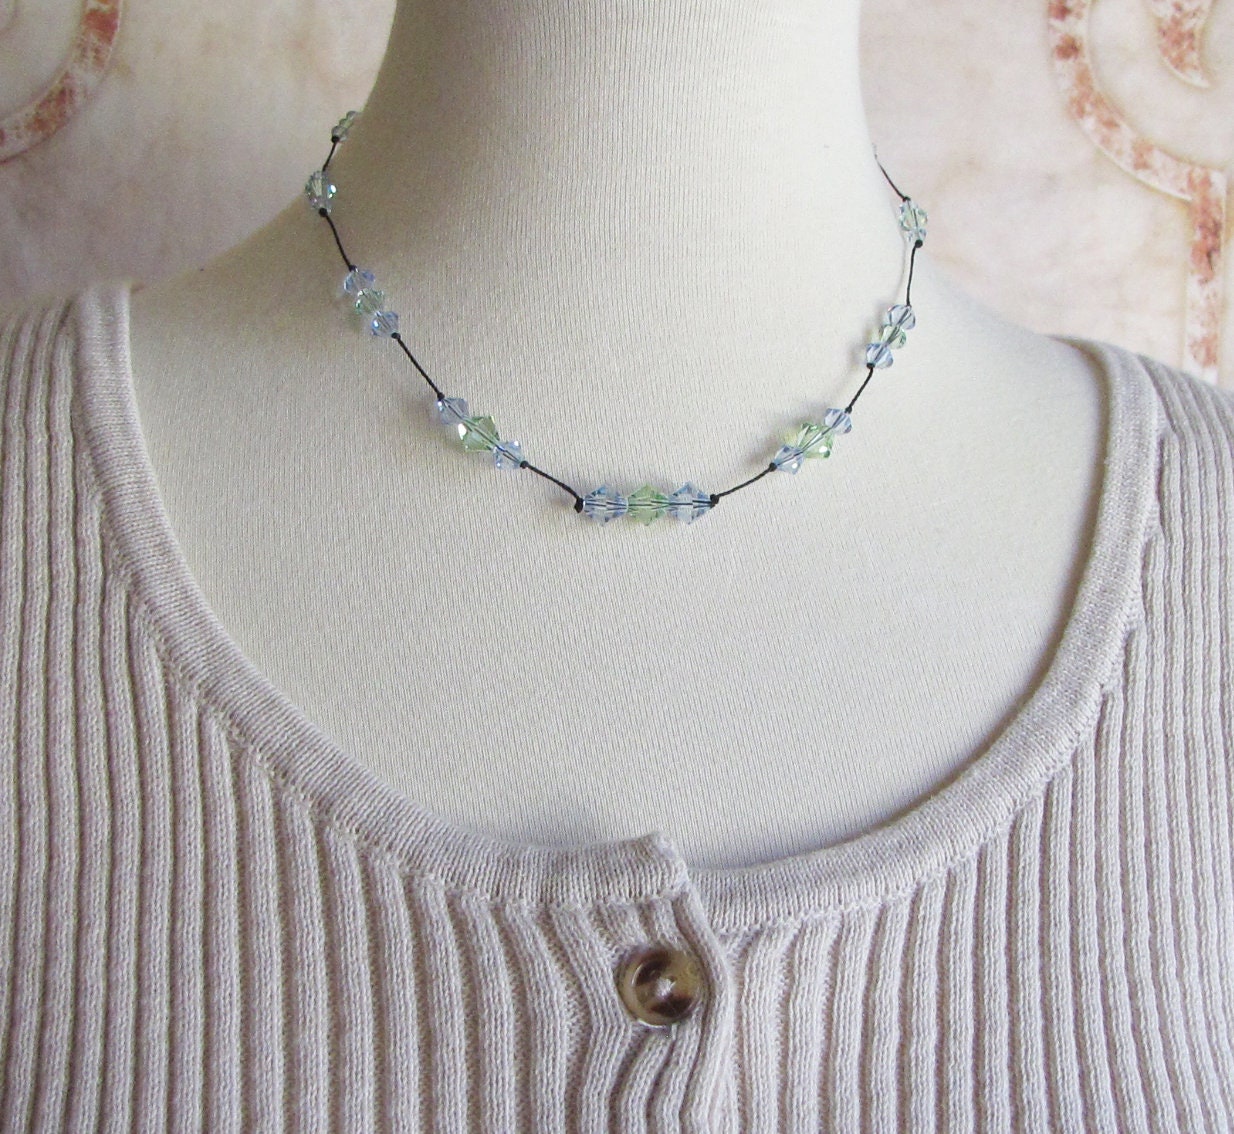 tin cup crystal necklace on nylon